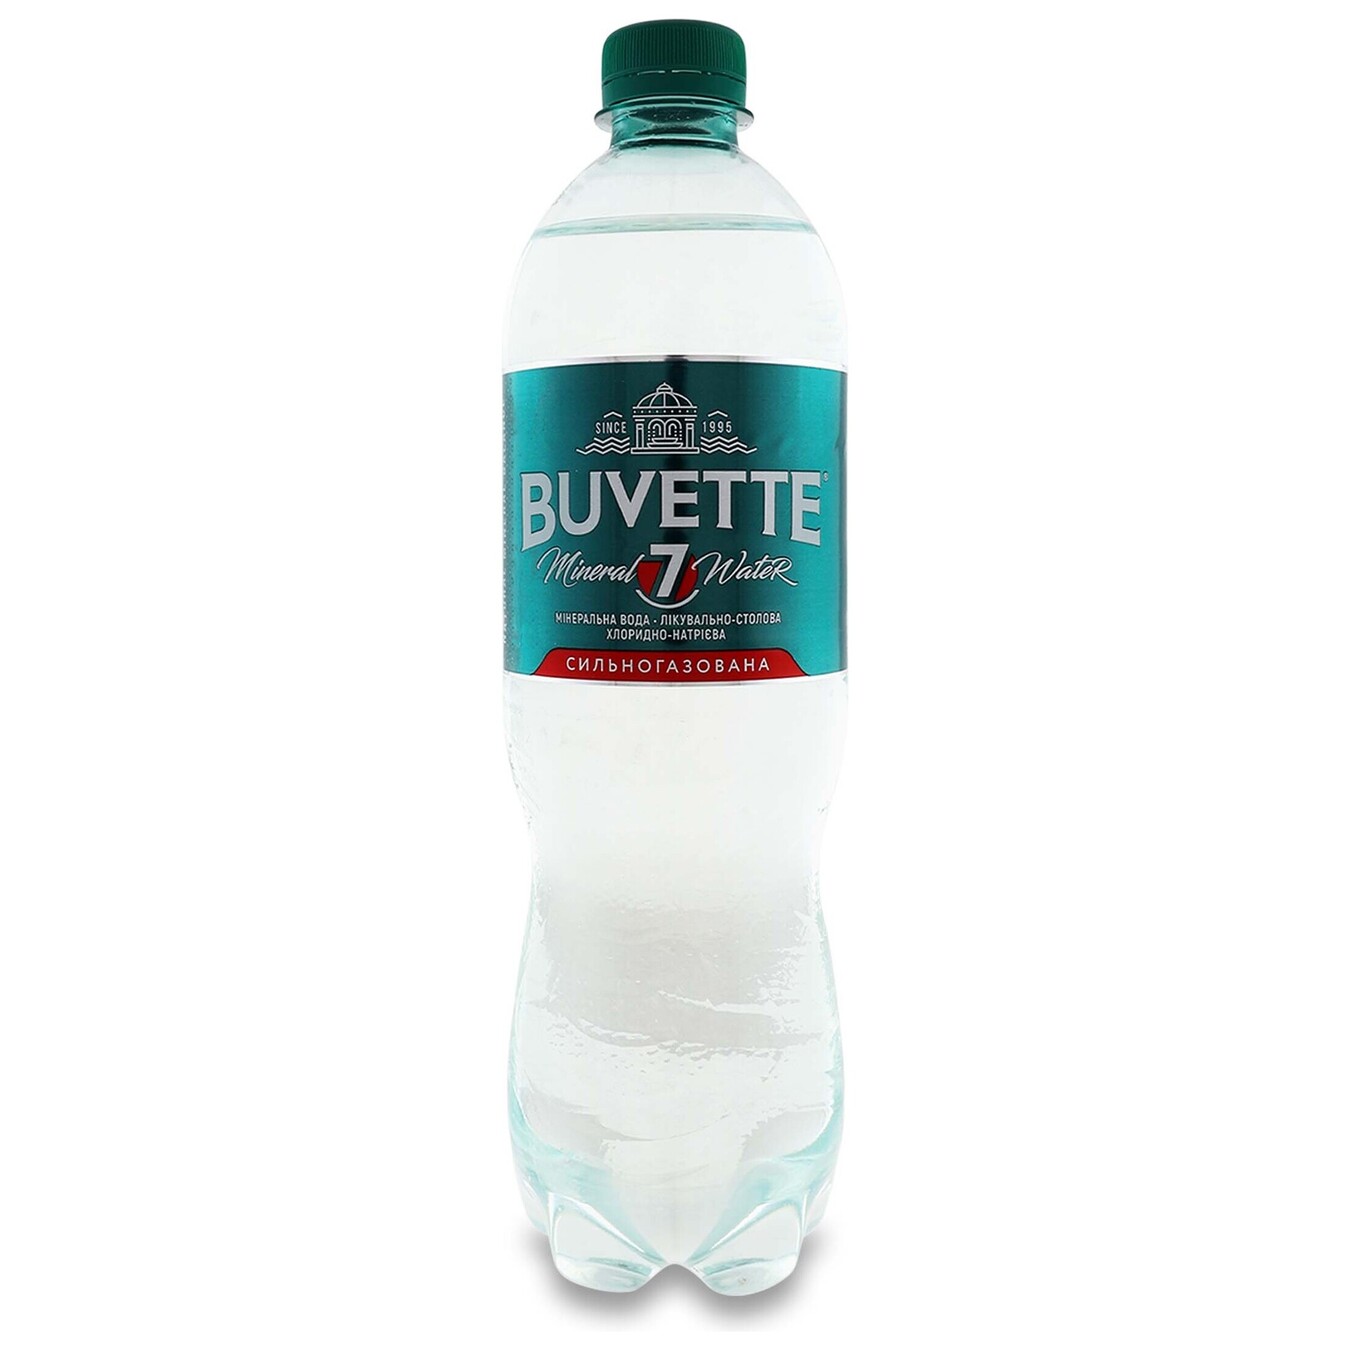 Carbonated Mineral Water Buvette 7 0,75l